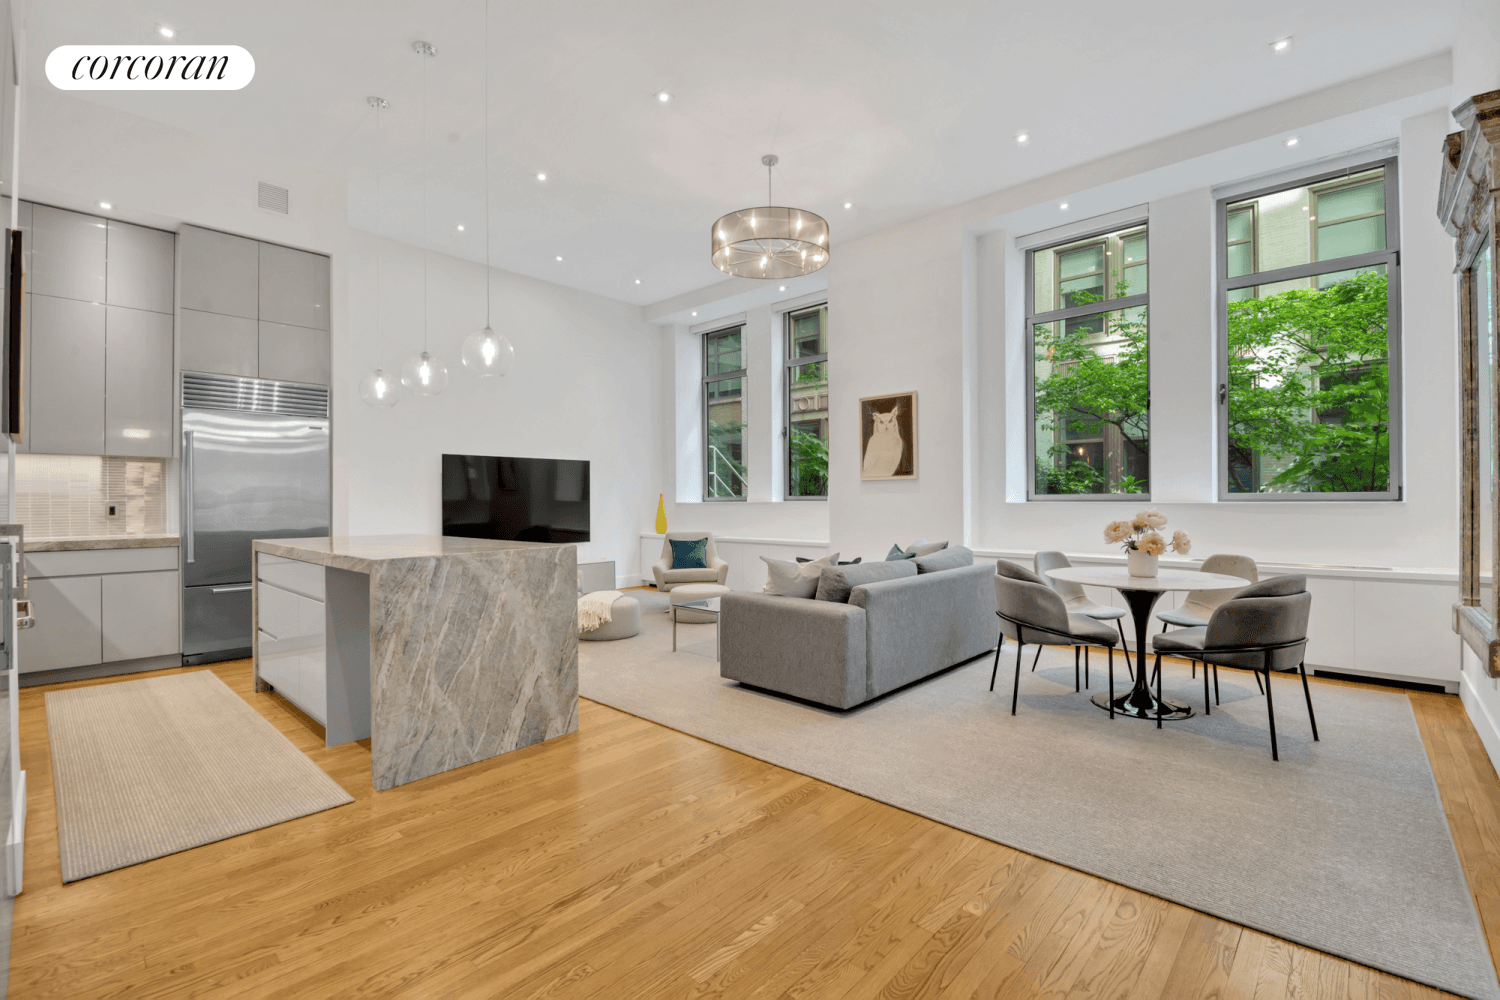 A stunning renovation of this loft condominium at the famed Chelsea Mercantile features 12'8 ceiling hights and a bright southern exposure to the lush landscaped private garden.